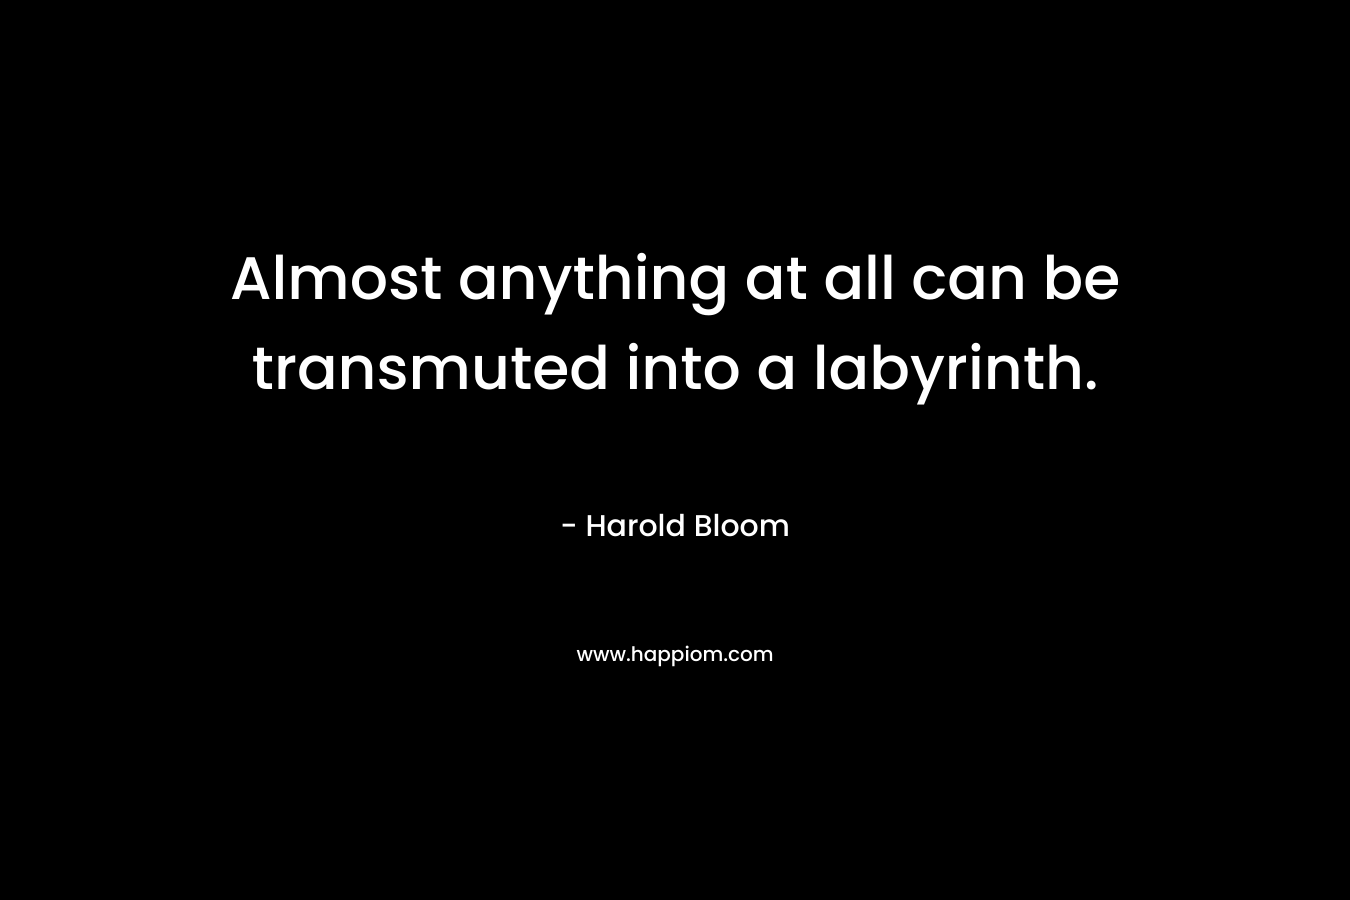 Almost anything at all can be transmuted into a labyrinth. – Harold Bloom